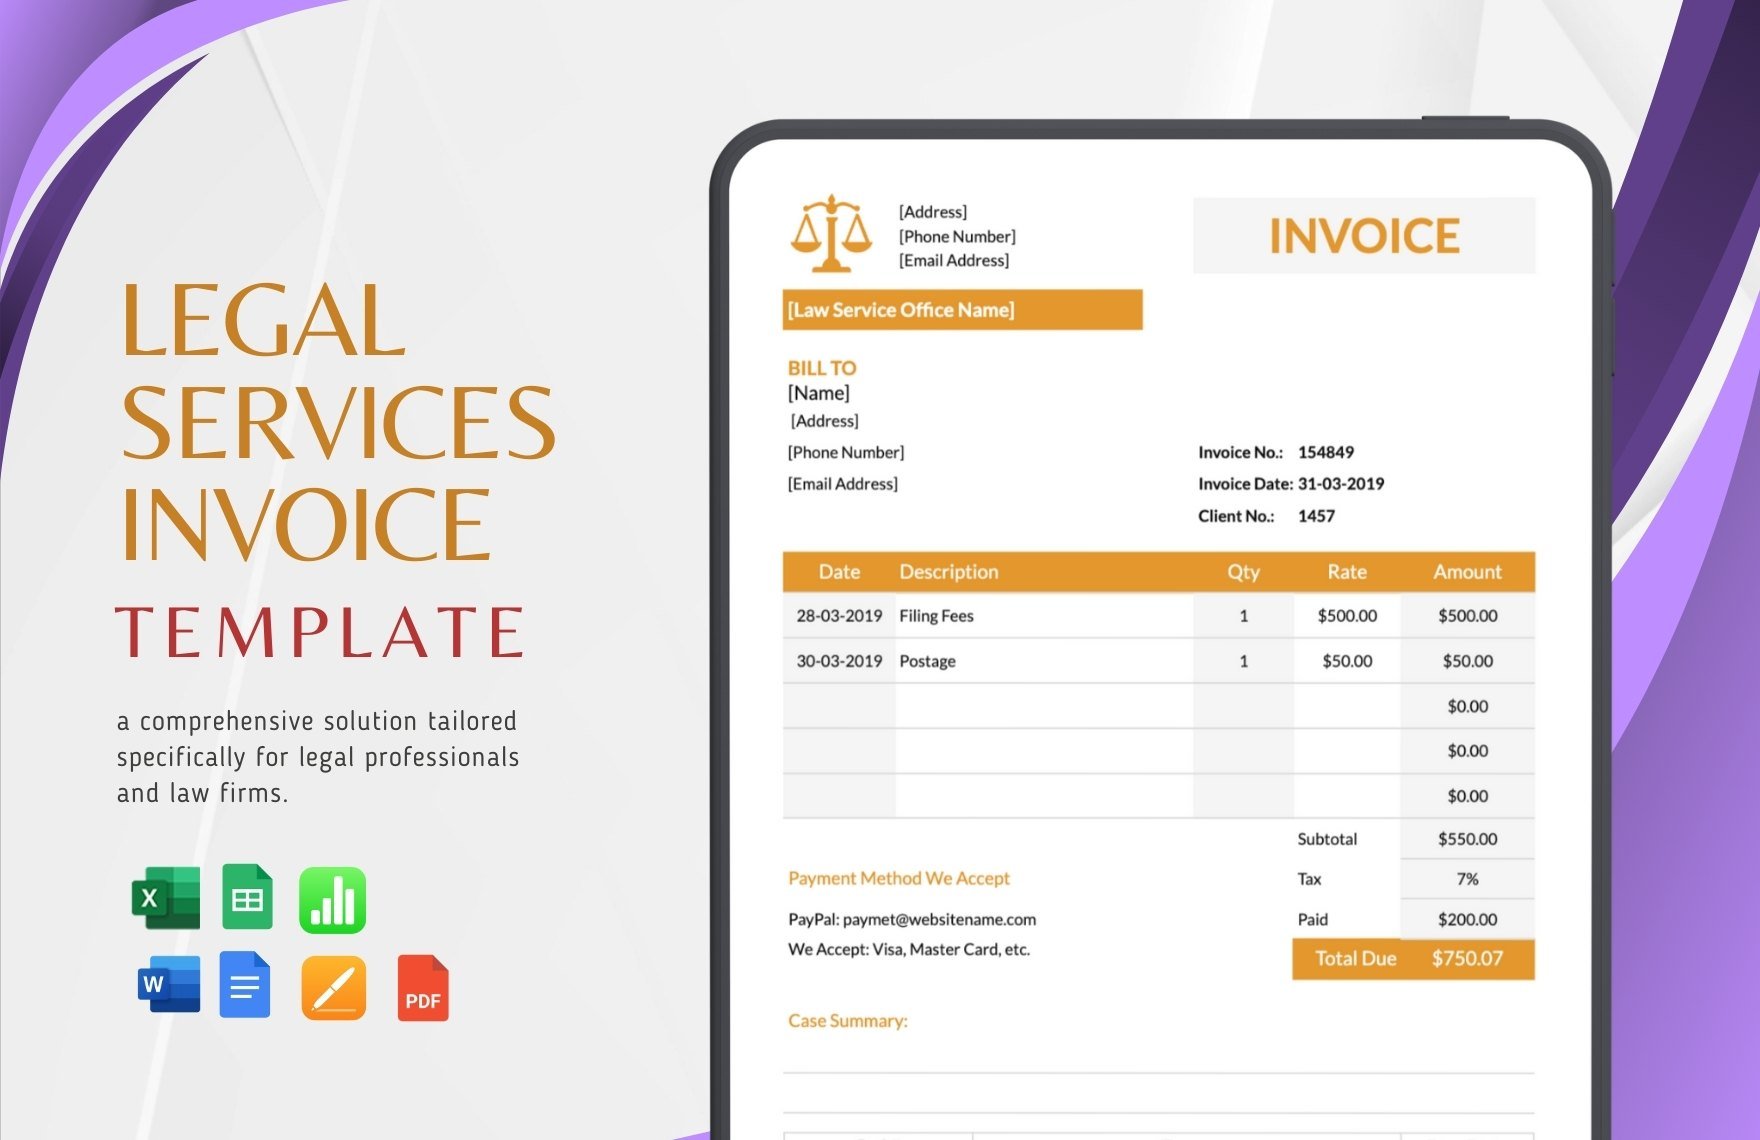 Free Legal Services Invoice Template in Word, Google Docs, Excel, PDF, Google Sheets, Apple Pages, Apple Numbers